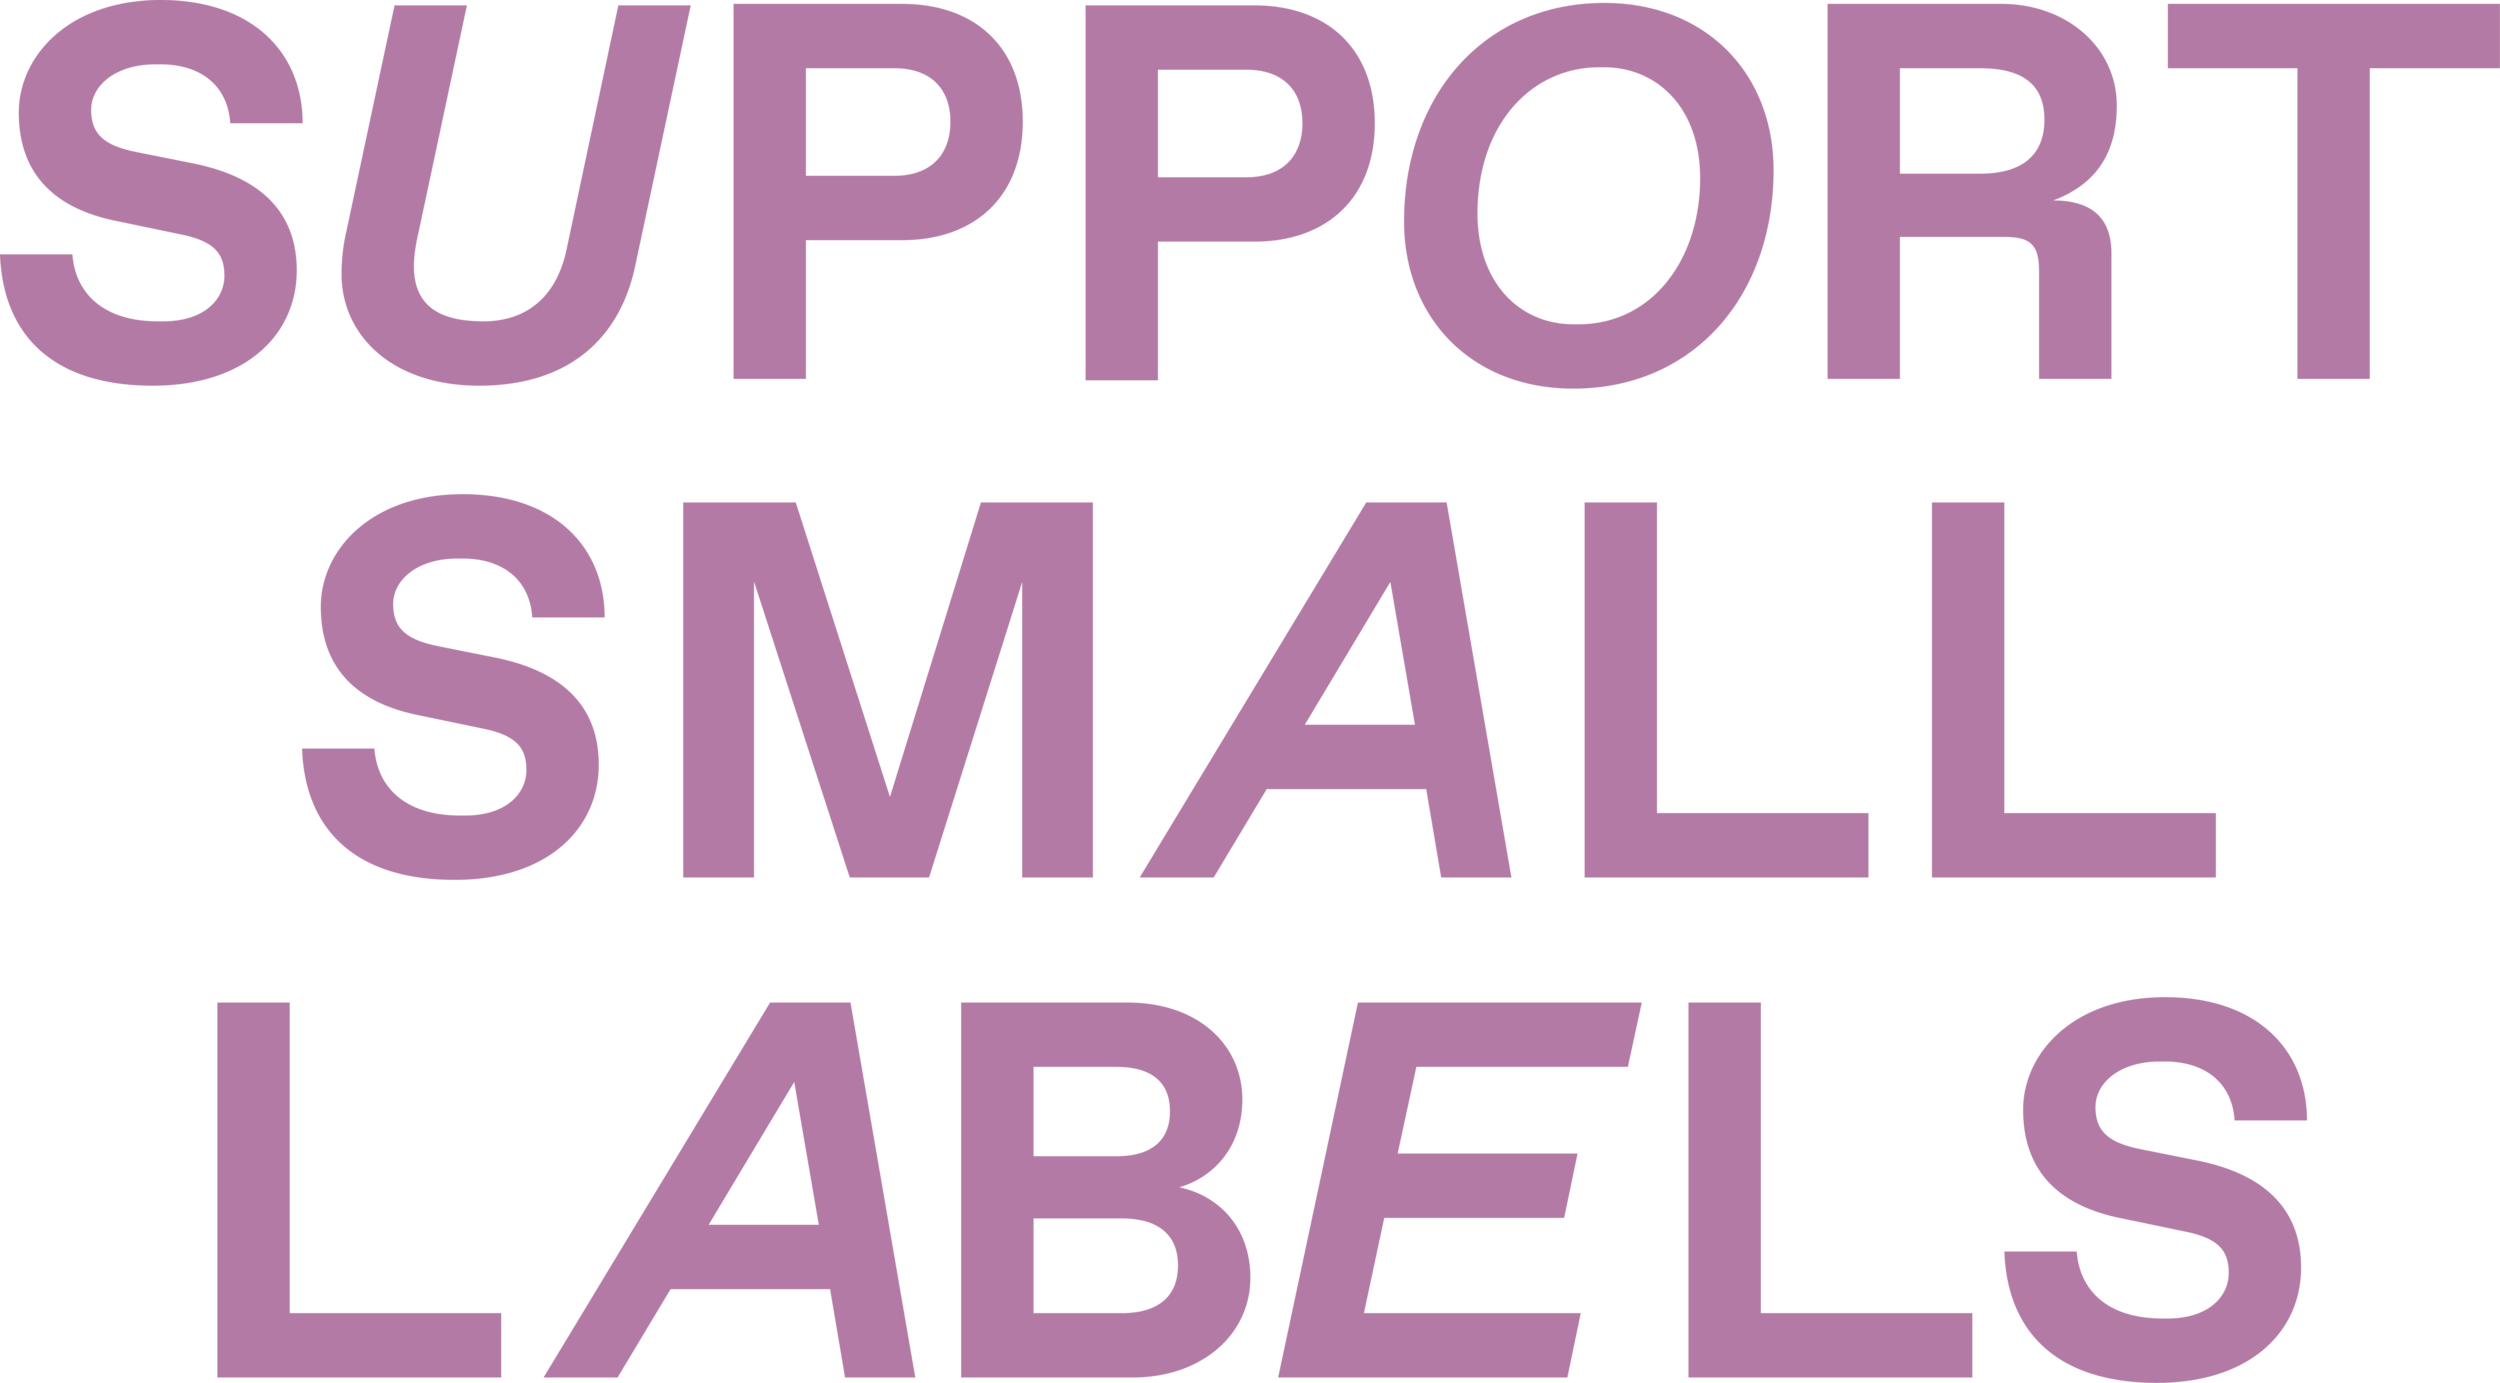 SUPPORT SMALL LABELS